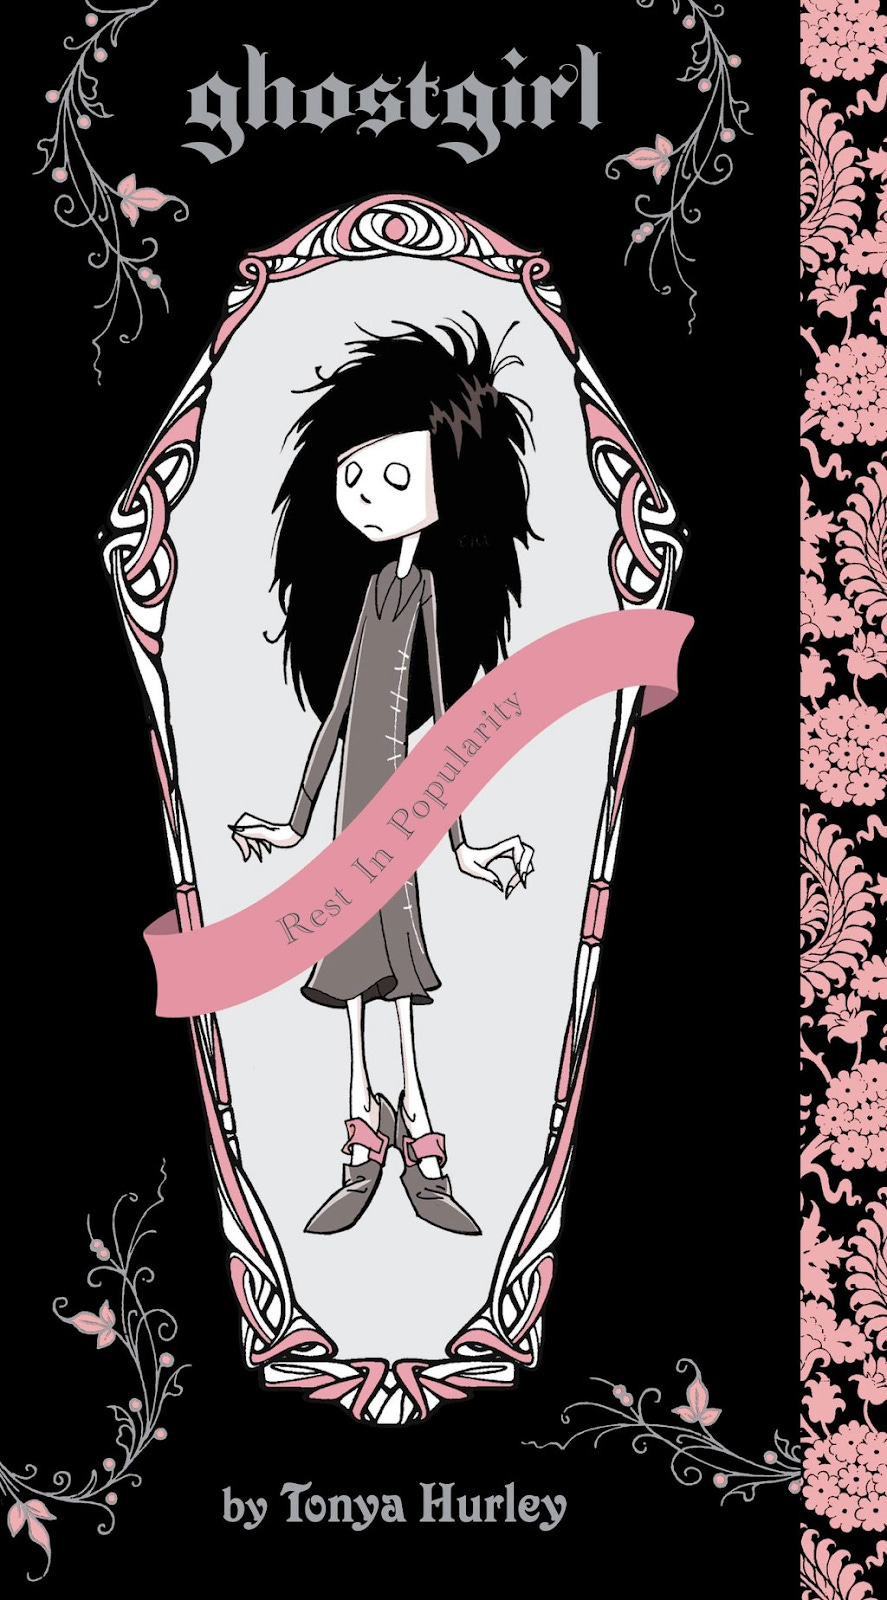 A cartoon of a child with long black hair

Description automatically generated